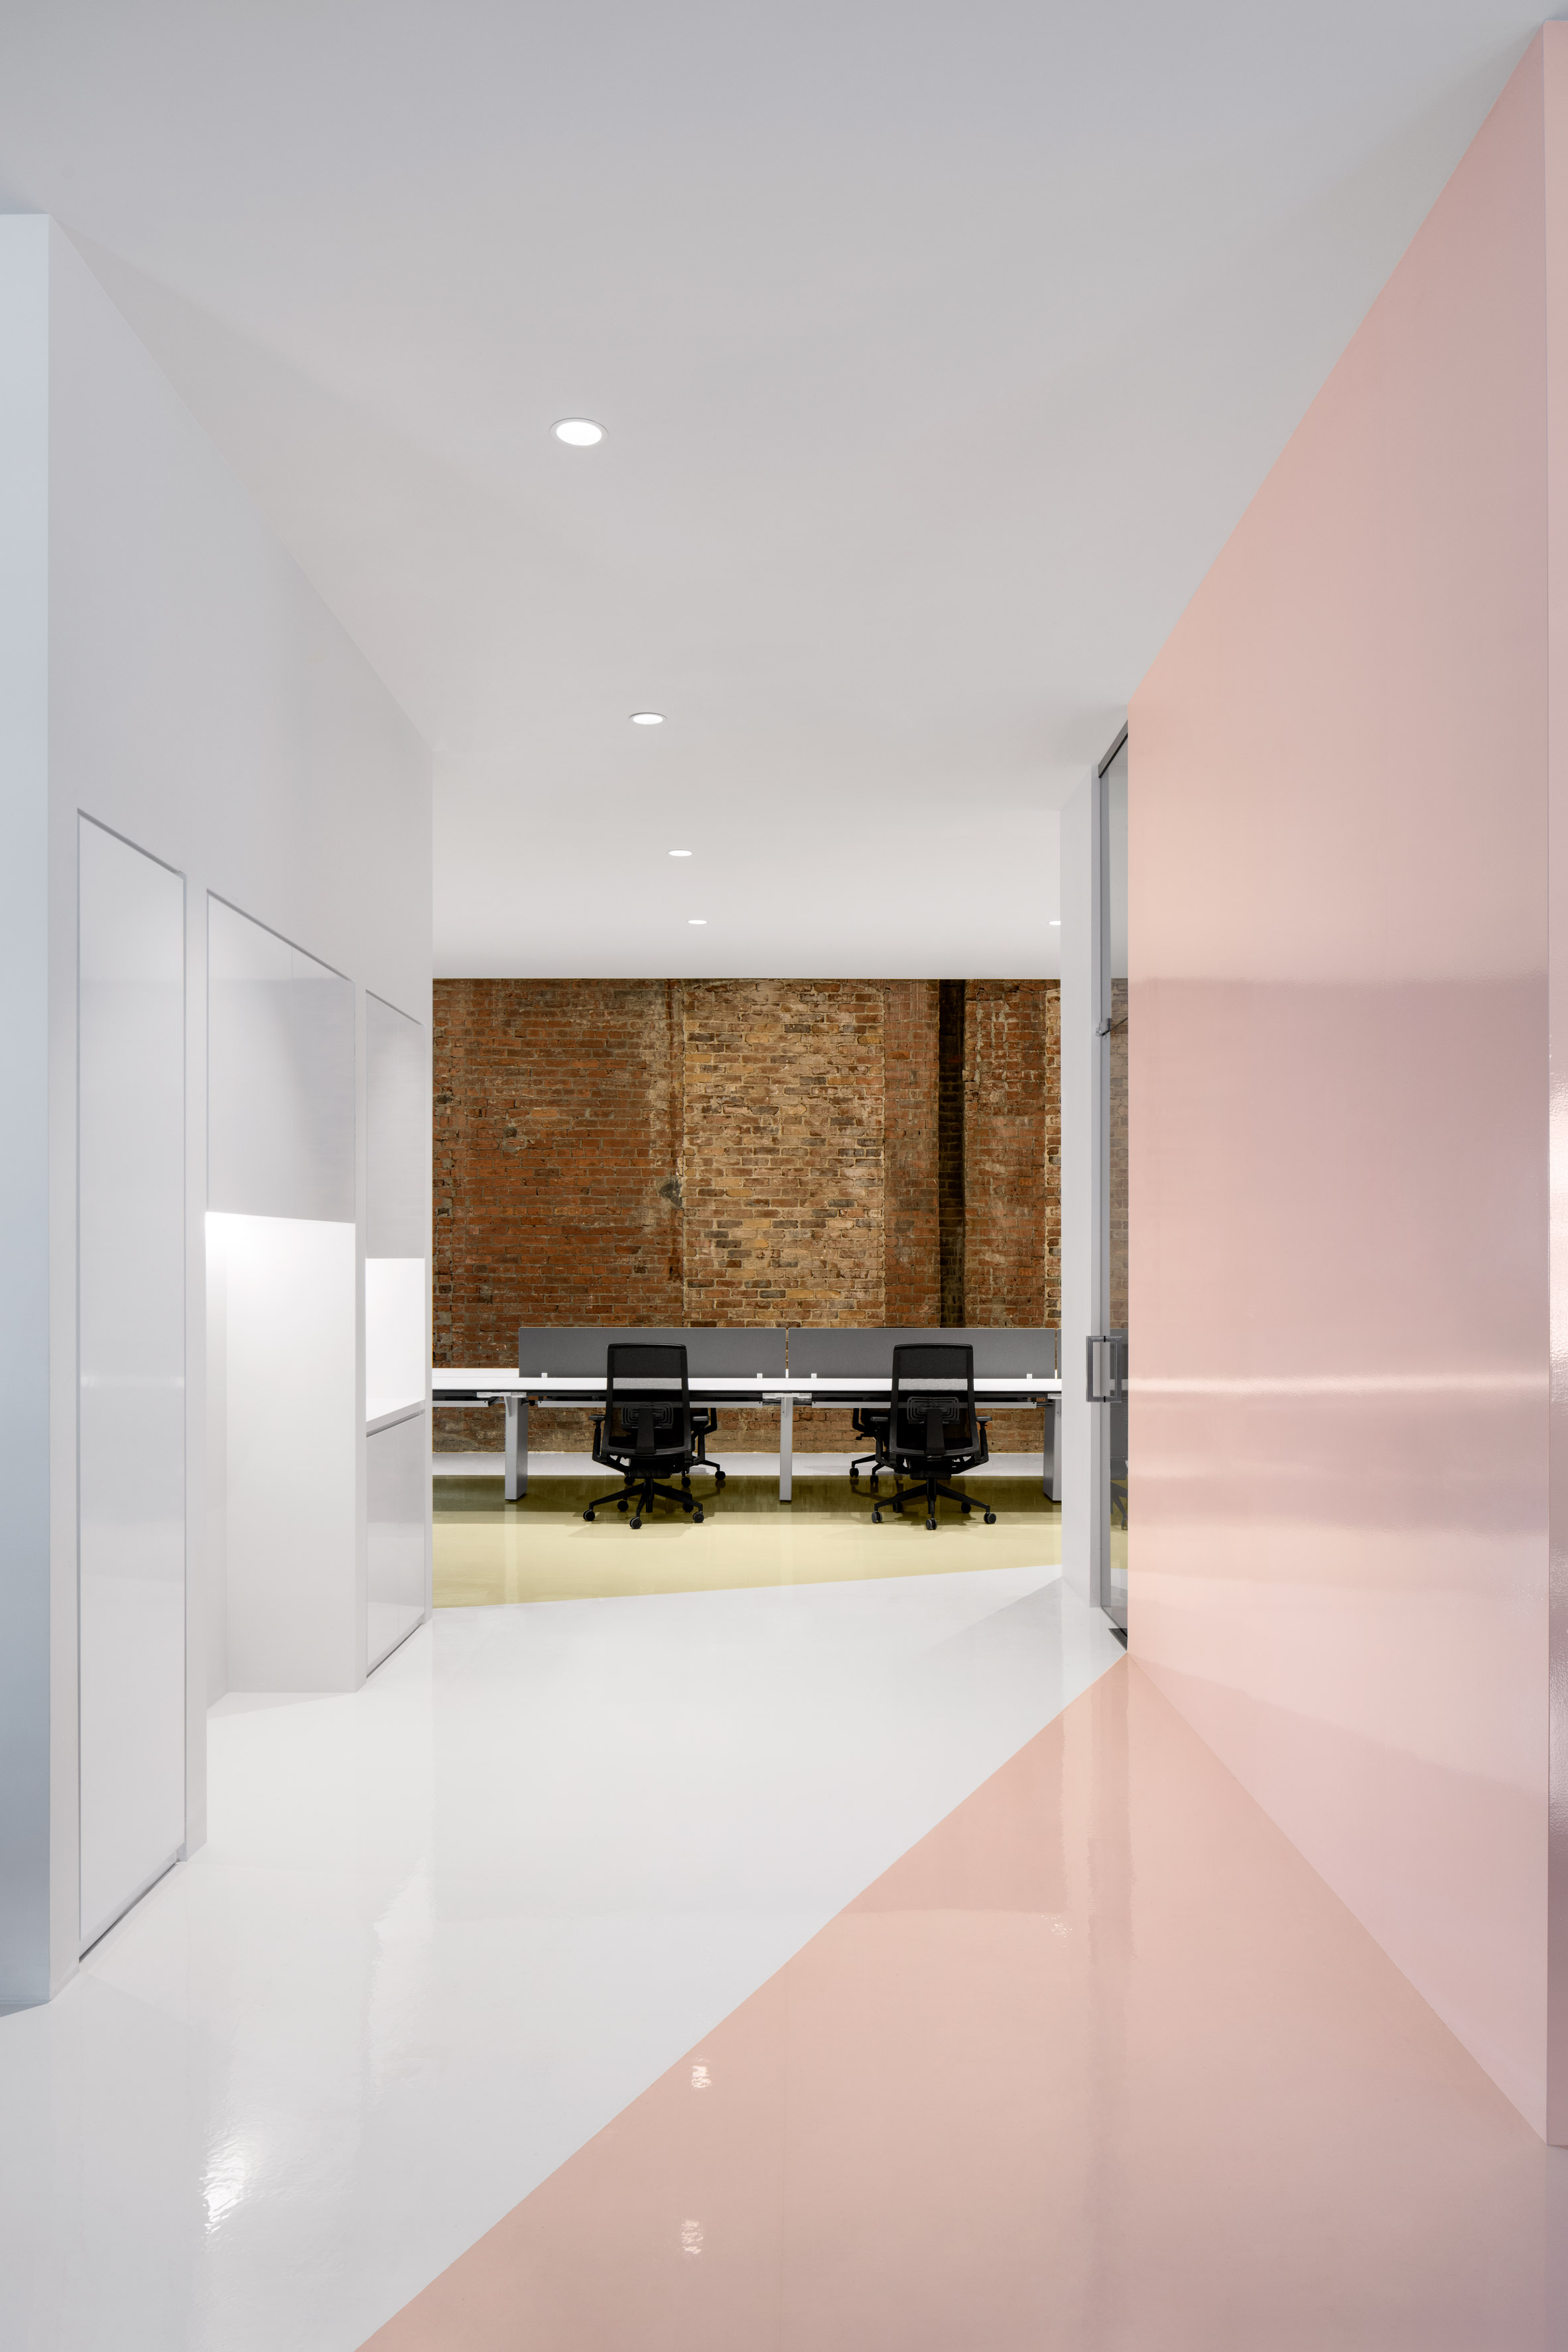 ACDF Architecture combines pastels and exposed brick at Lightspeed offices